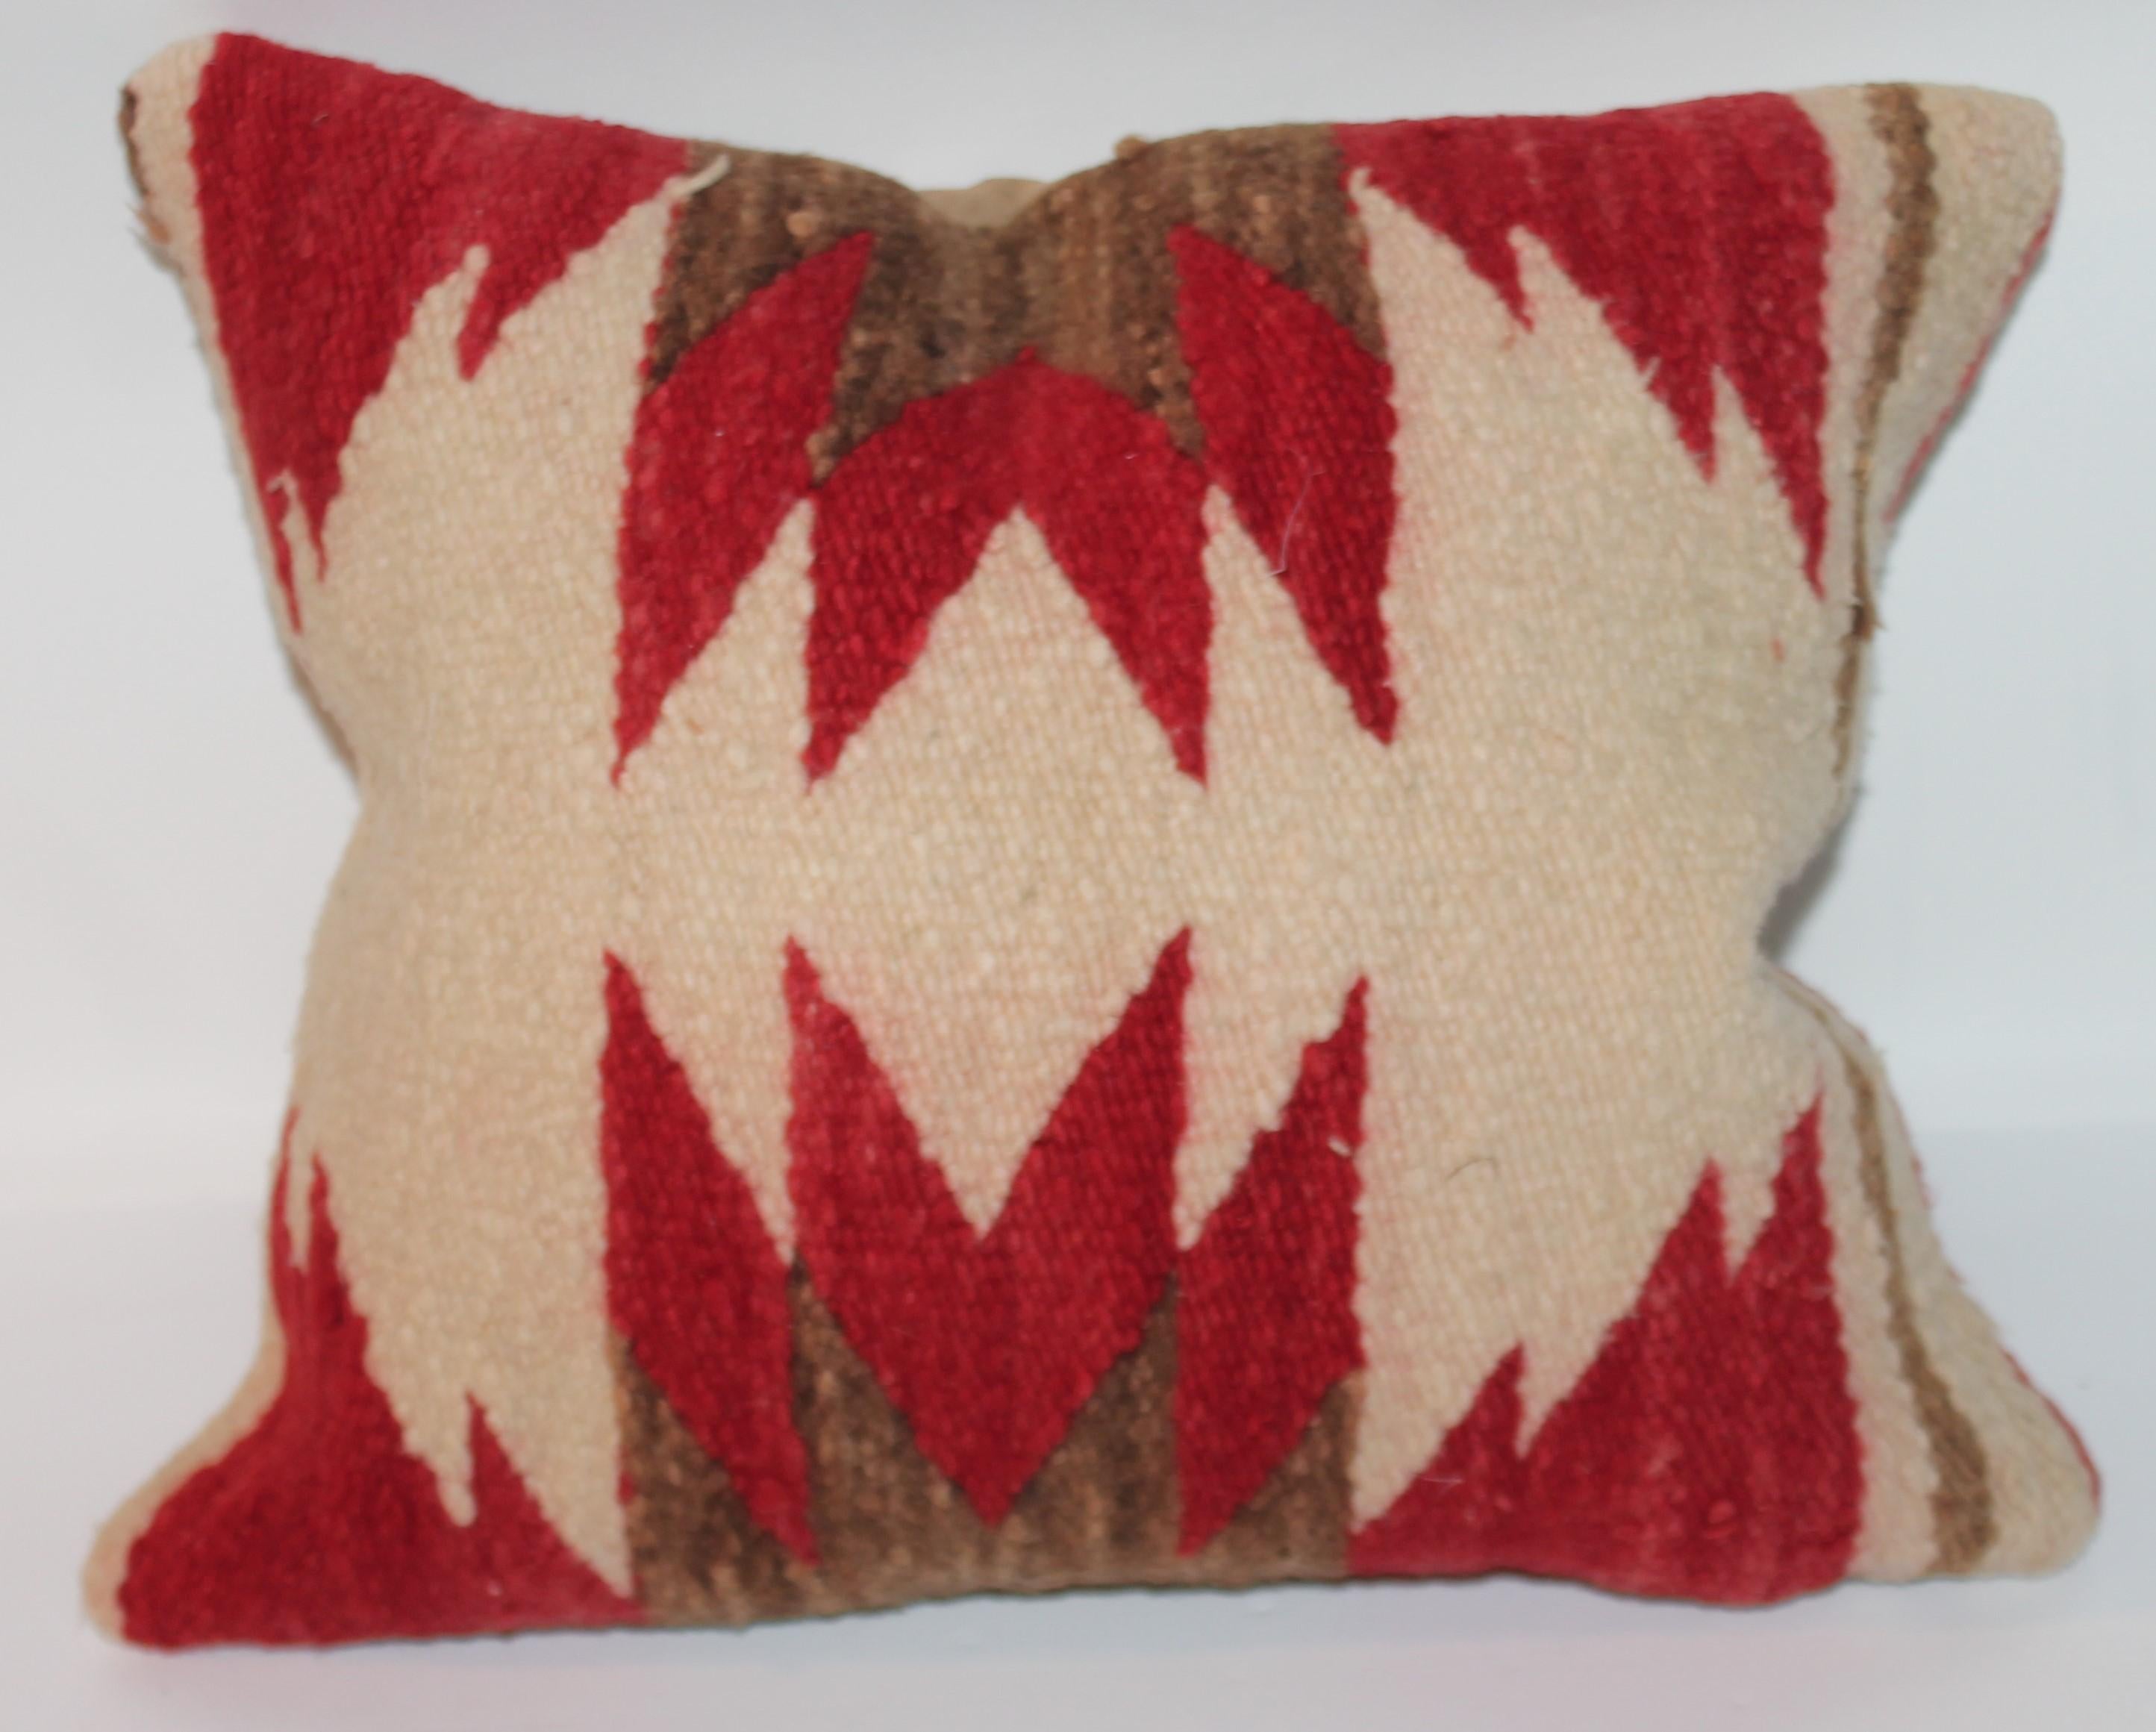 Decorative Navajo Indian weaving pillow with Suede back. New feather and down insert.